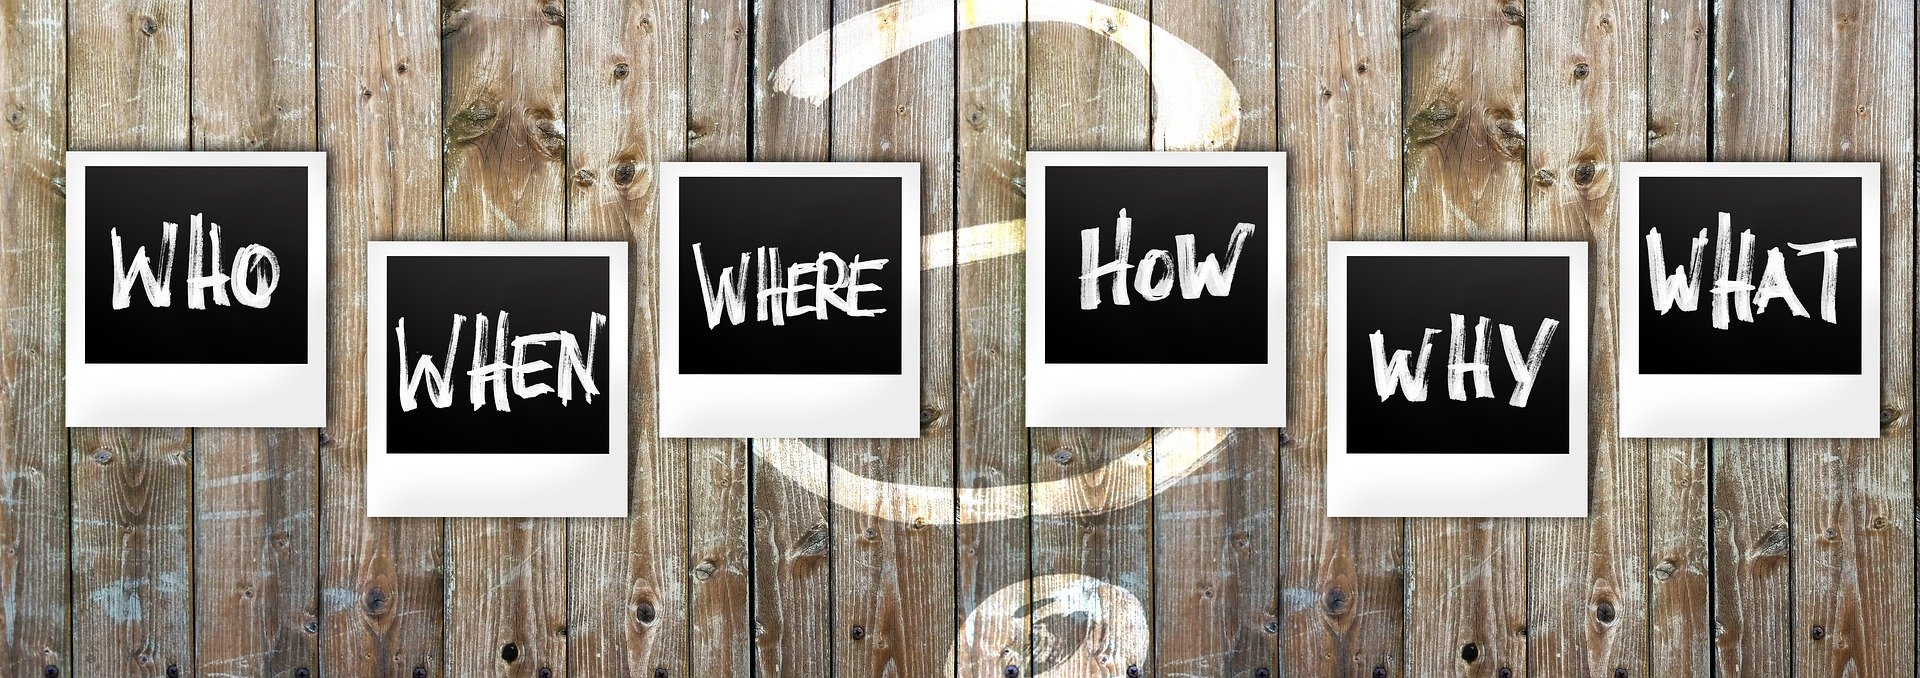 Illustration "Who", "When", "Where", "how", "Why" et "What"